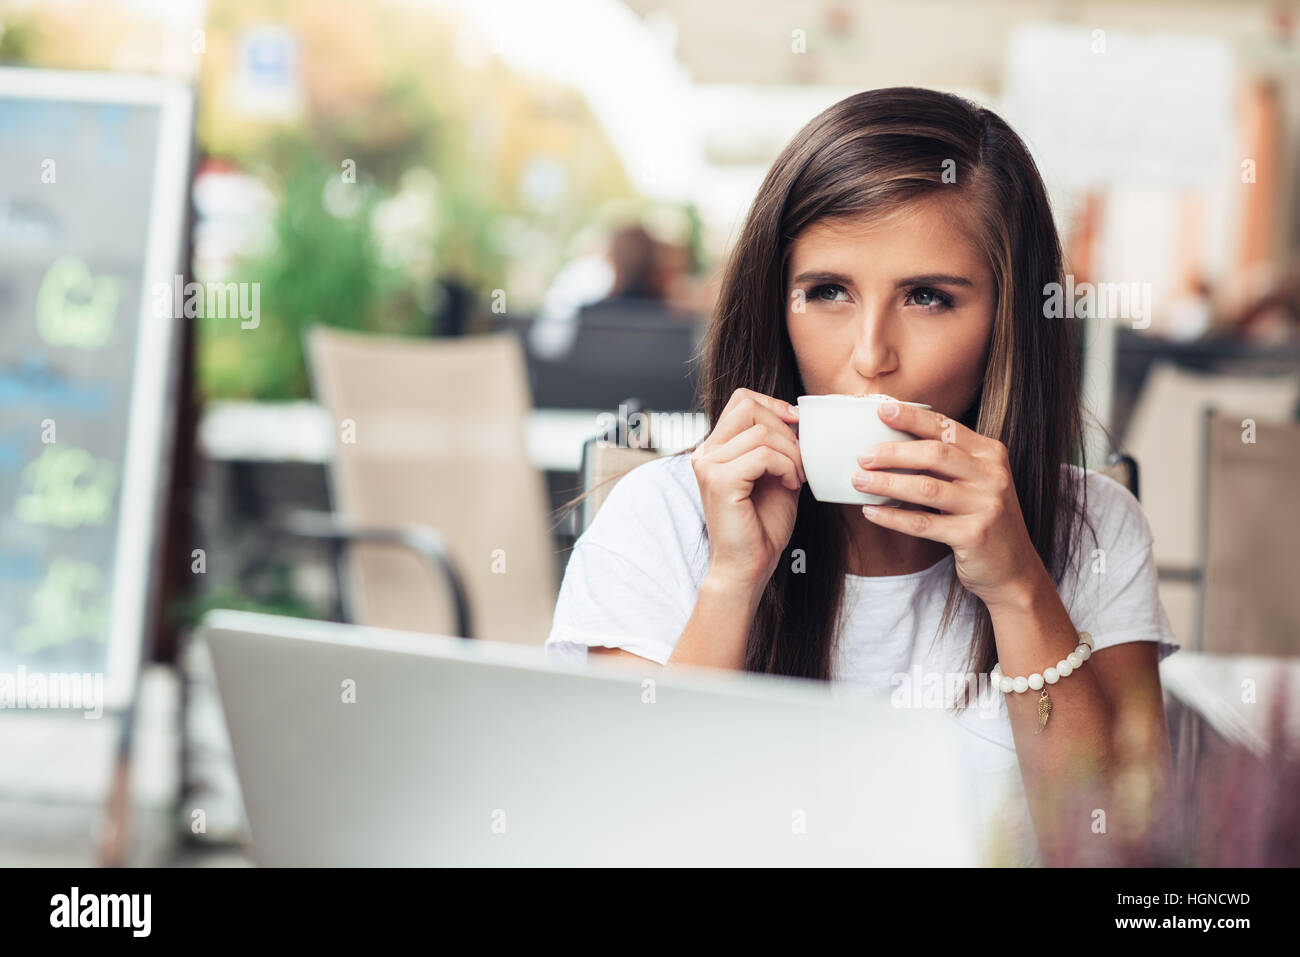 Attractive young woman drinking coffee at a sidewalk cafe Banque D'Images